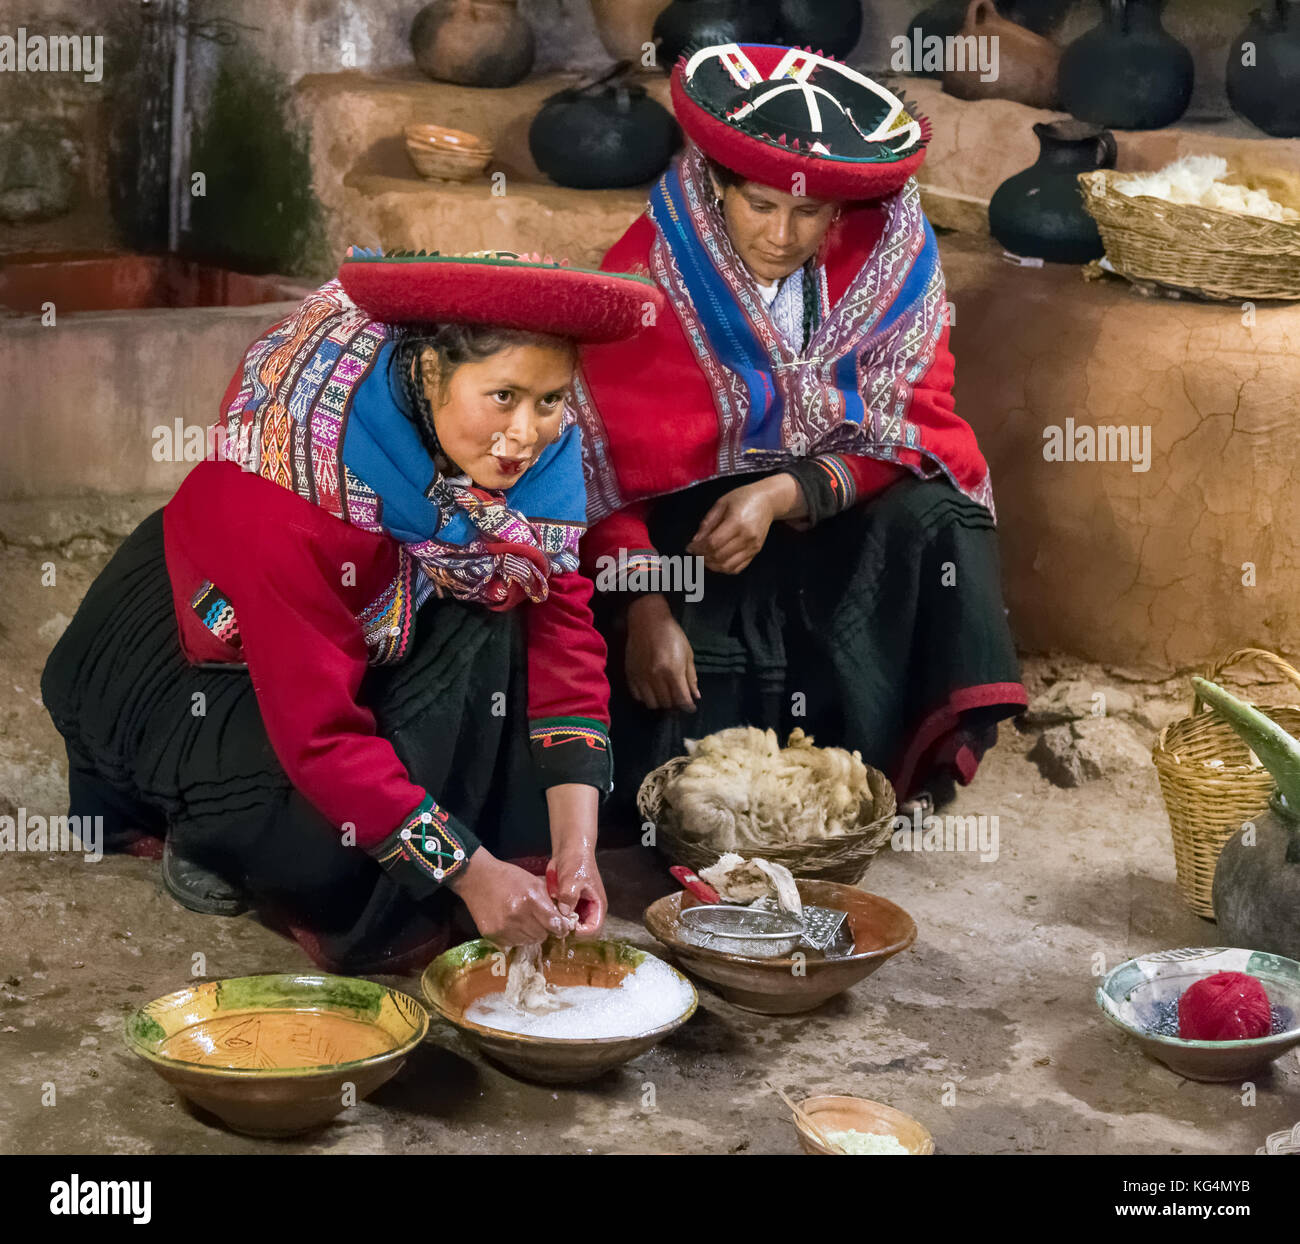 Women in traditional Peruvian clothes use natural dyes for Alpaca and Llama wool near Cusco, Peru Stock Photo